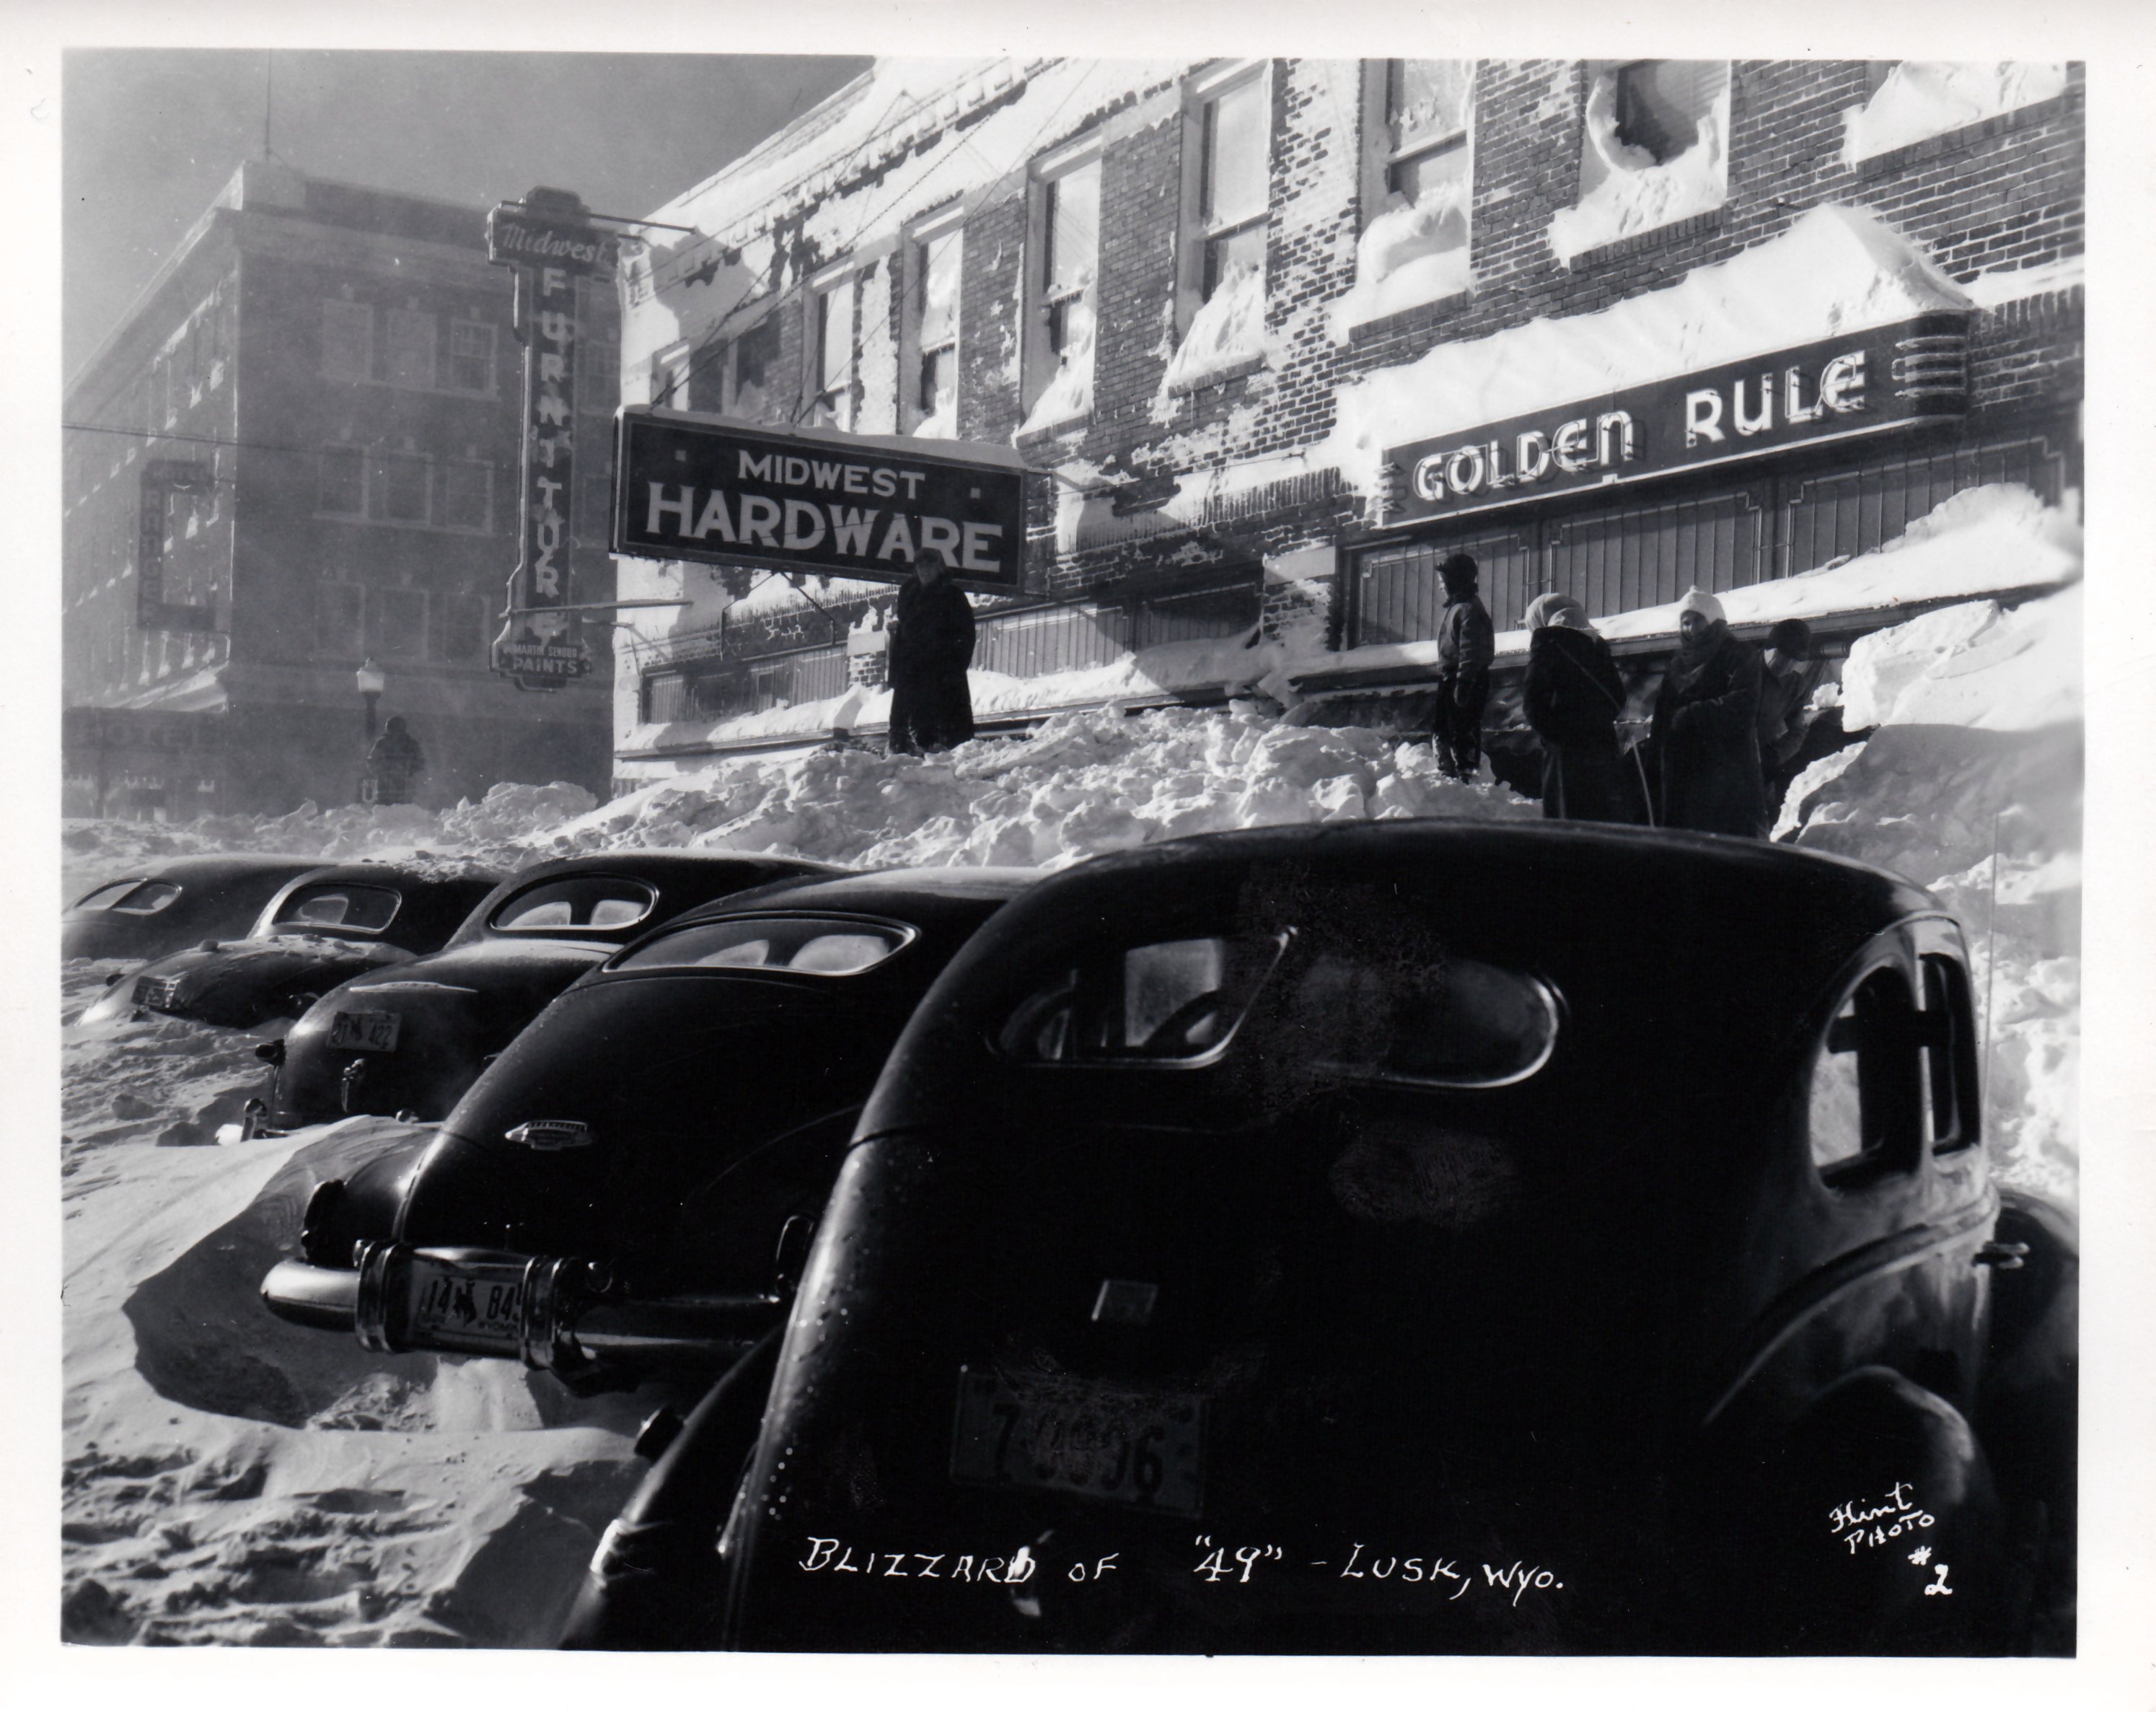 Old photo of cars and downtown area covered in snow.